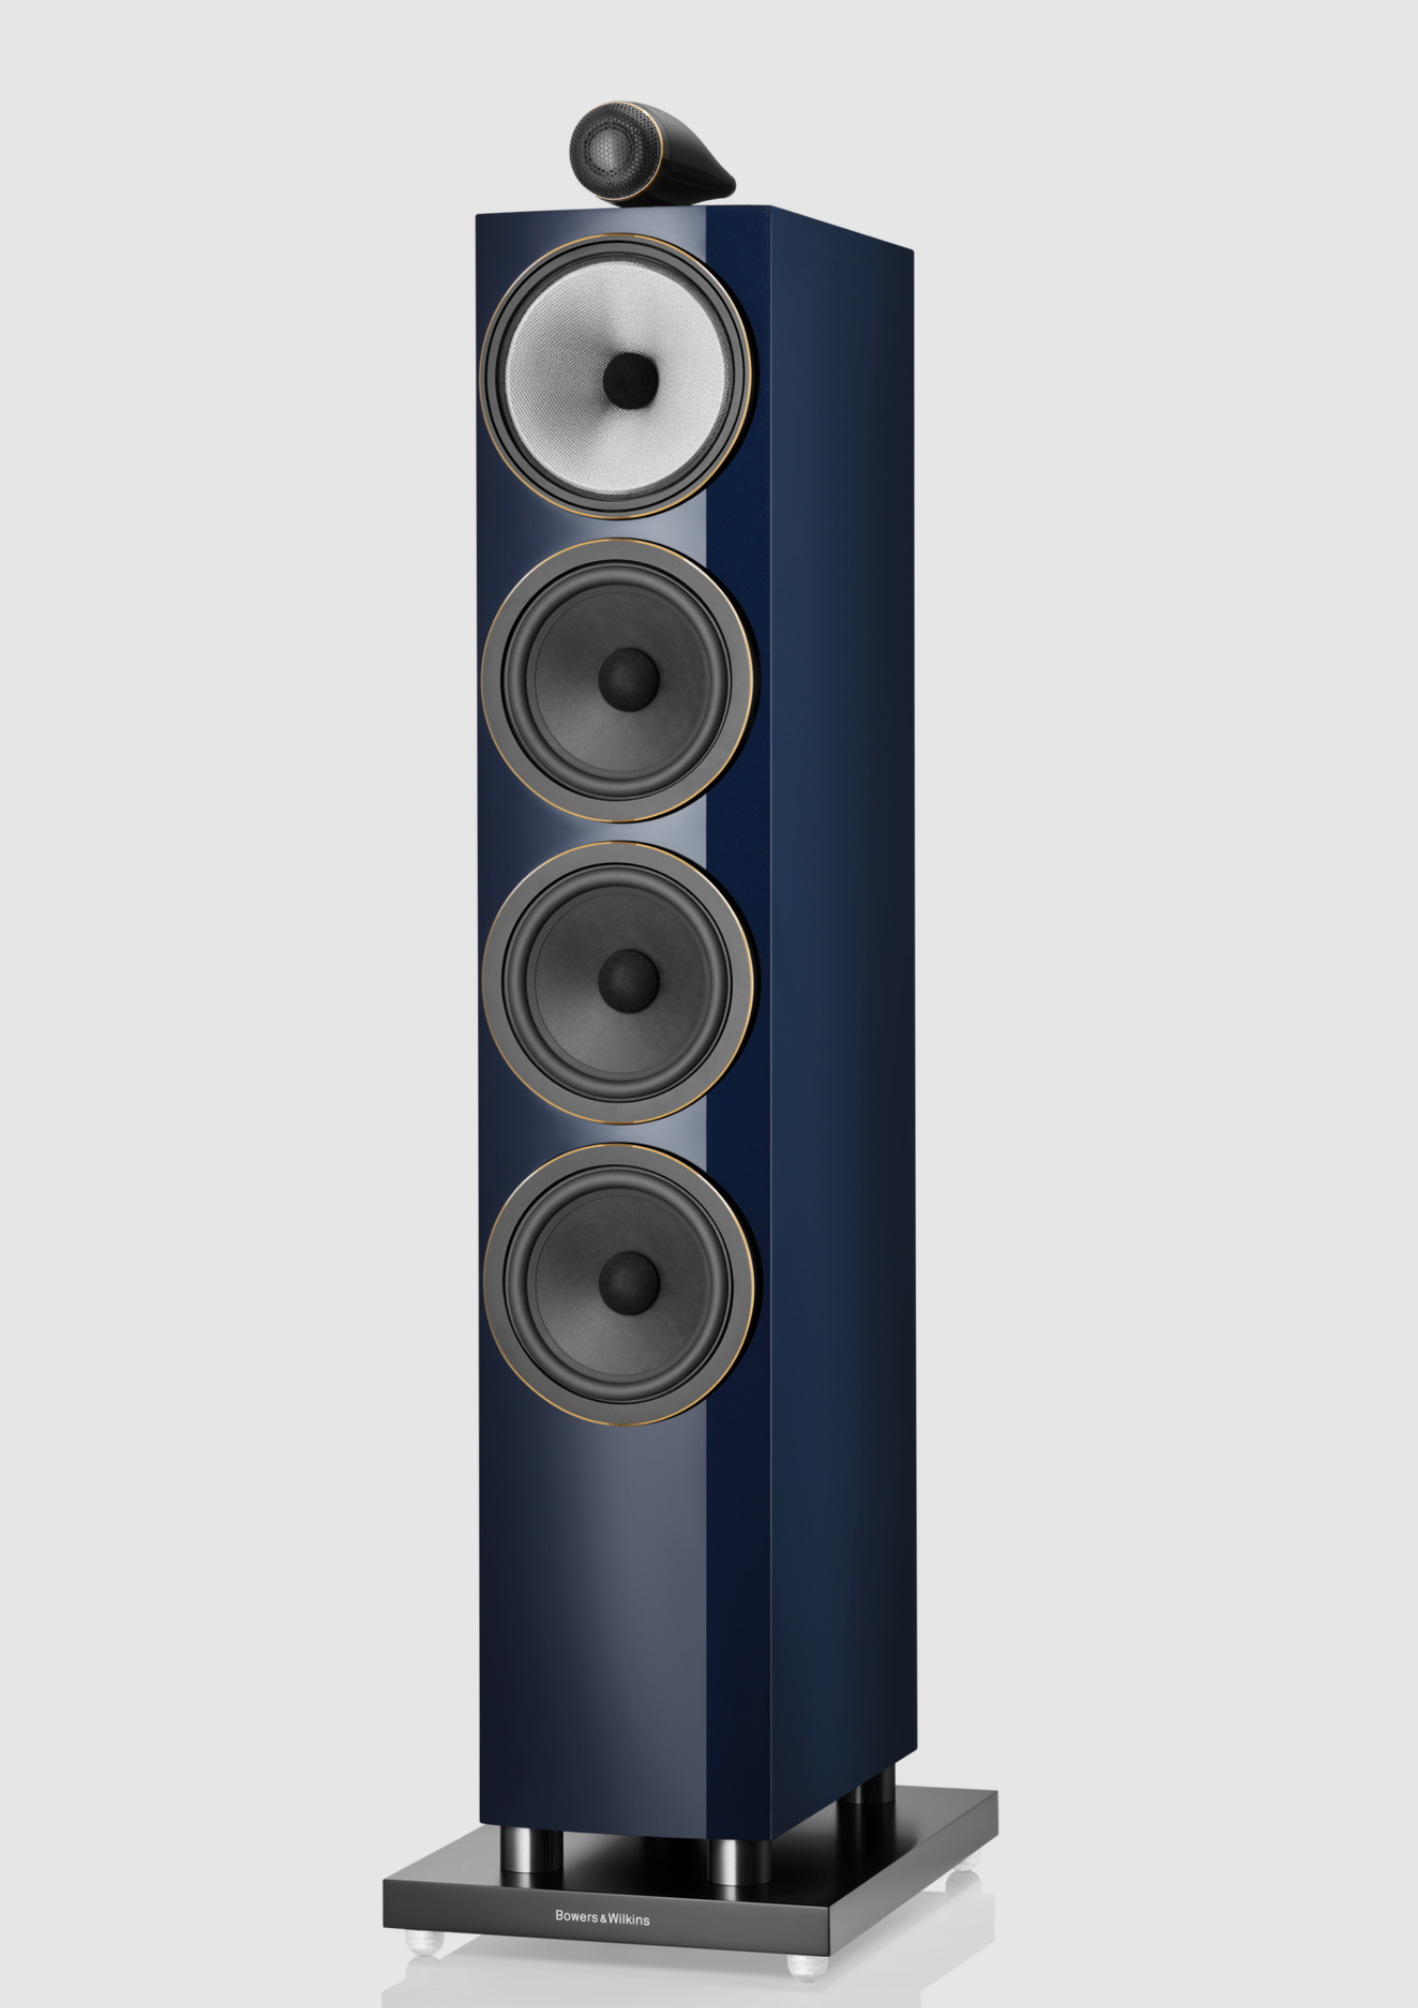 Bowers & Wilkins 702 S3 Signature Floorstanders in Midnight Blue Metallic. Image shows front and side of speaker